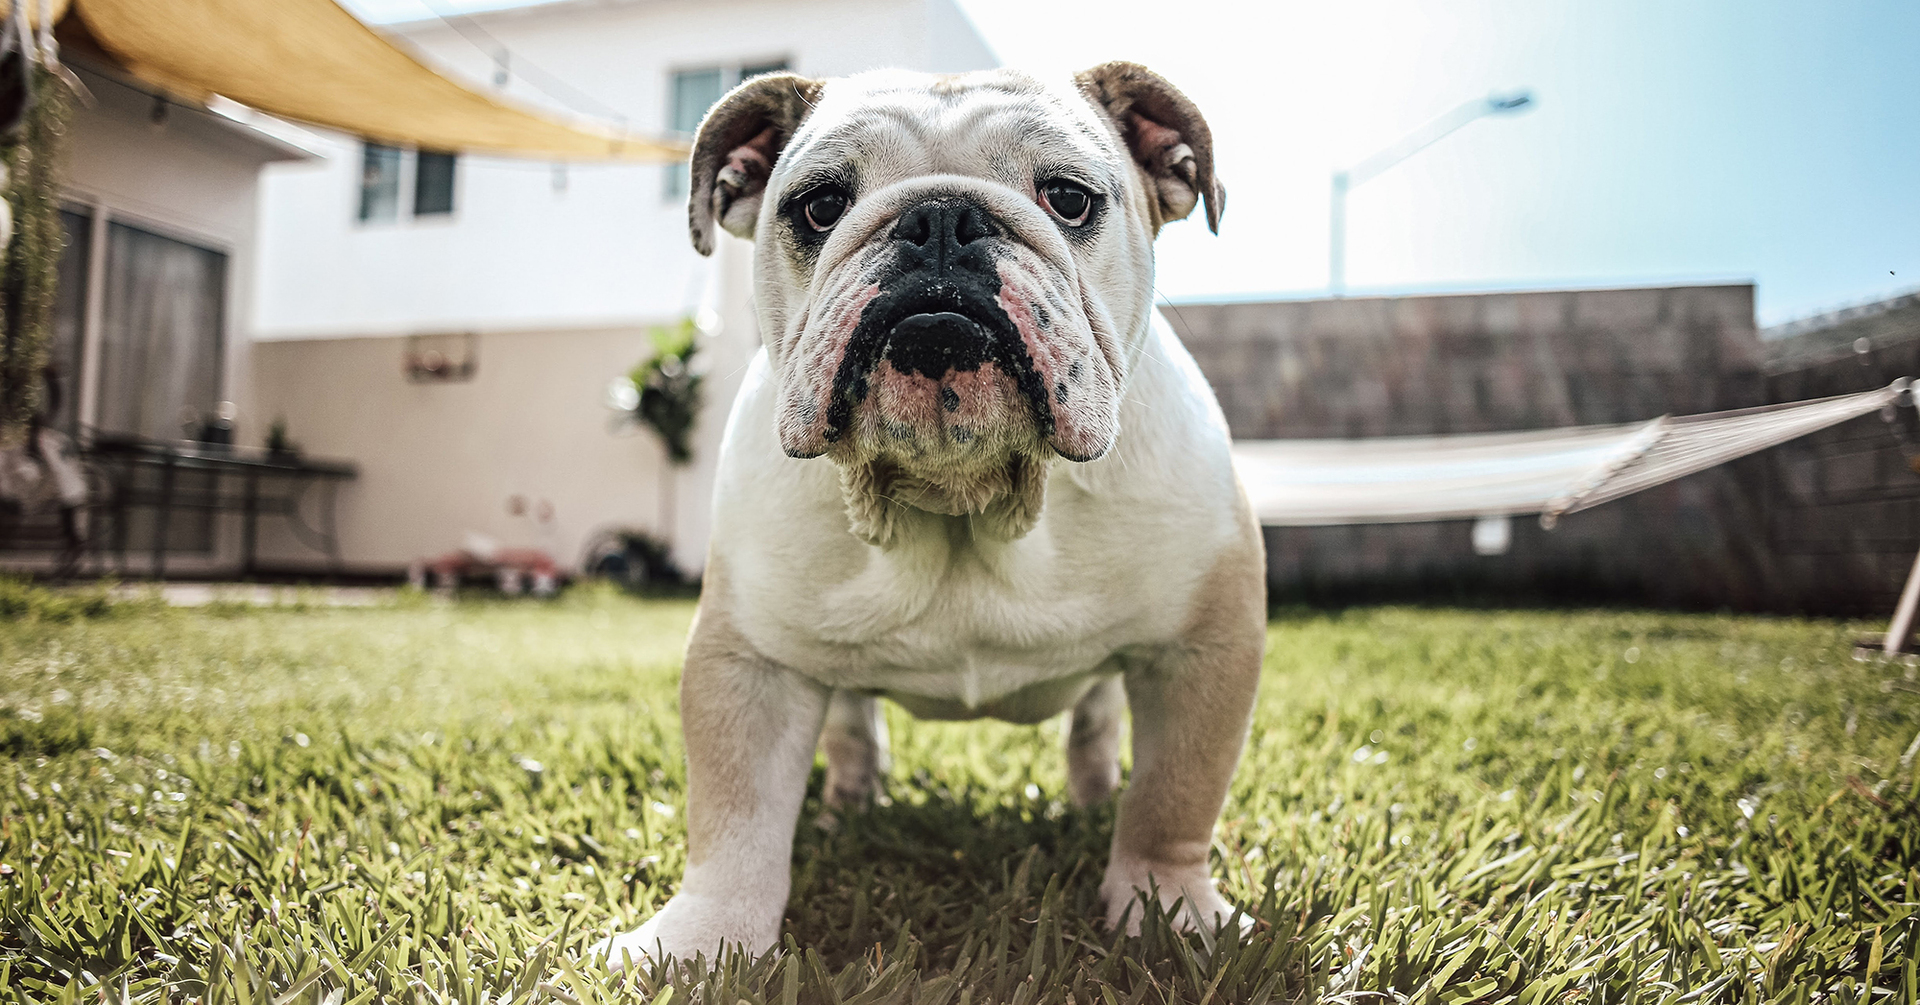 English Bulldogs are twice as sick as other dogs